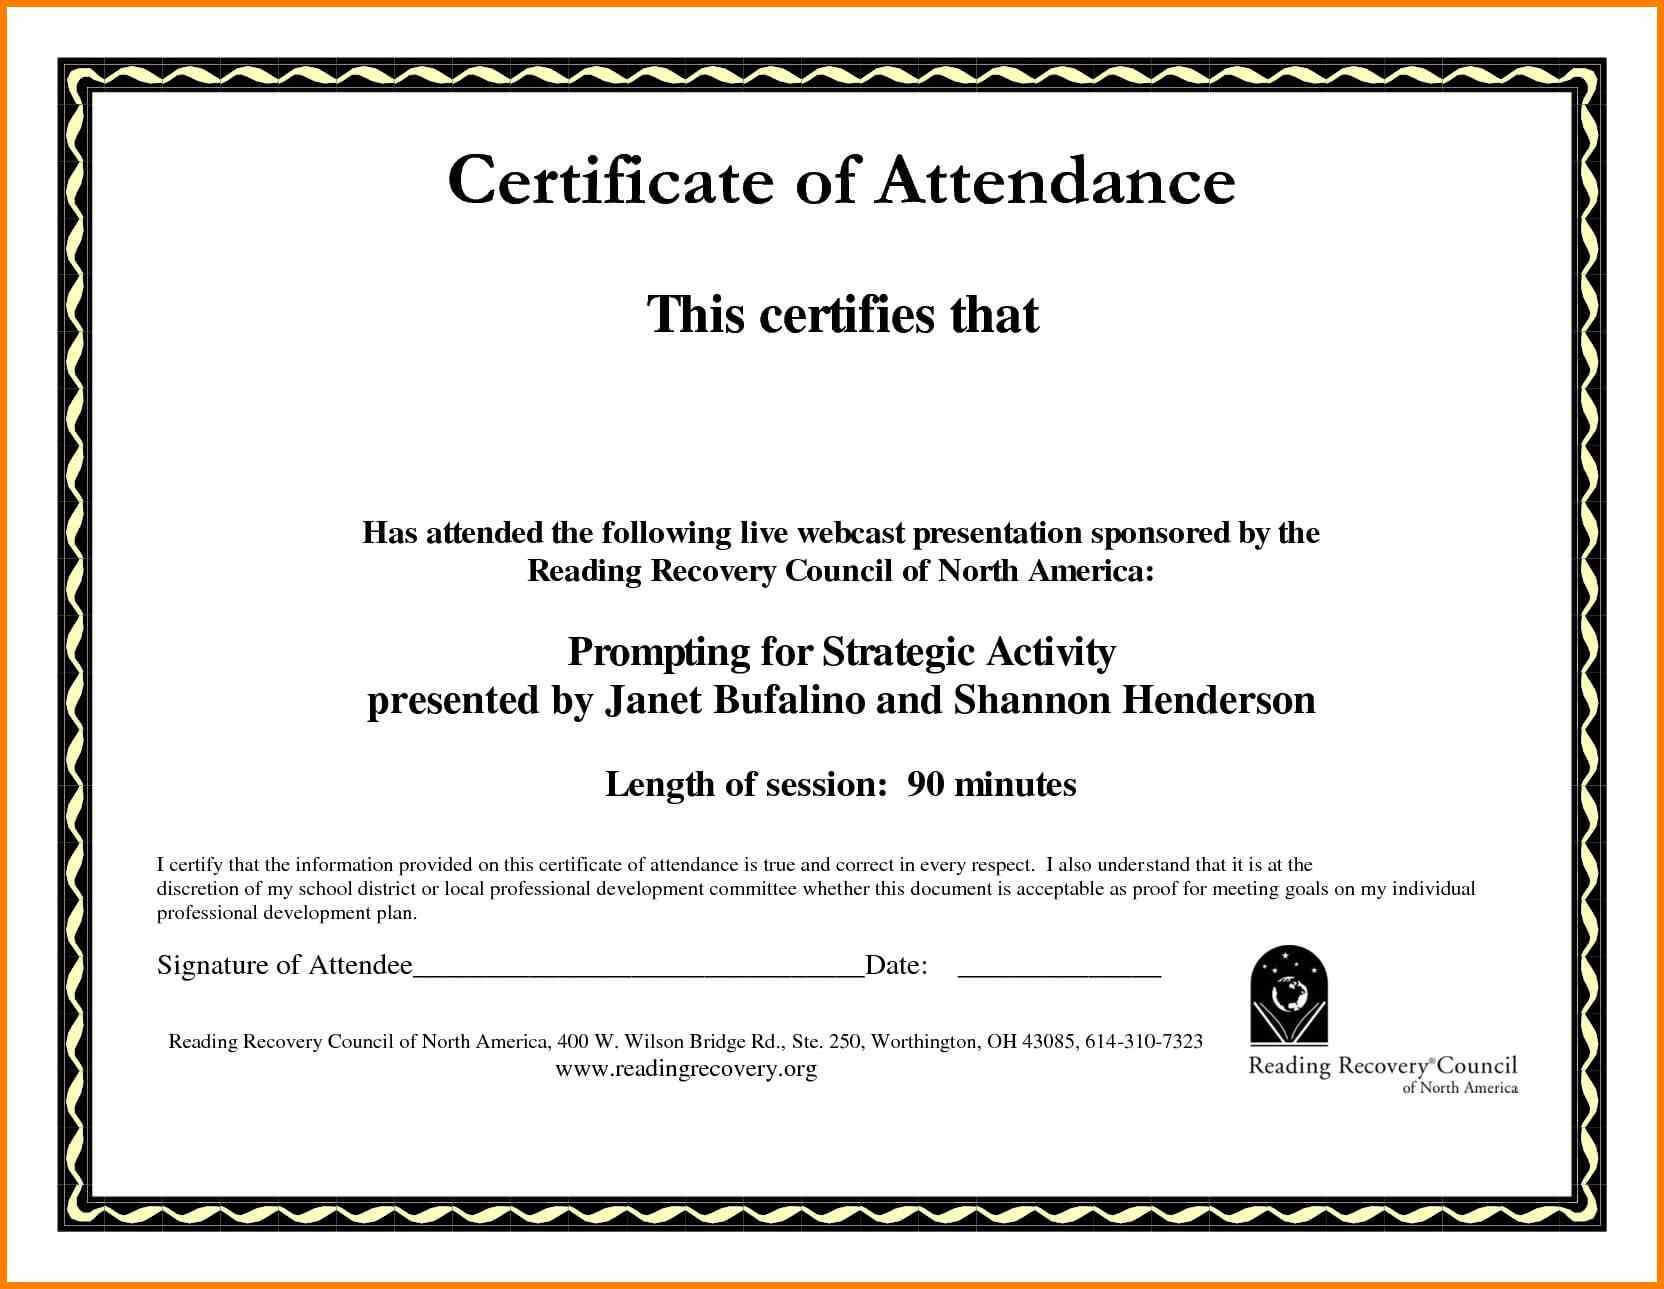 Certificate Of Attendance Template Word Ukran Agdiffusion Within Conference Certificate Of Attendance Template